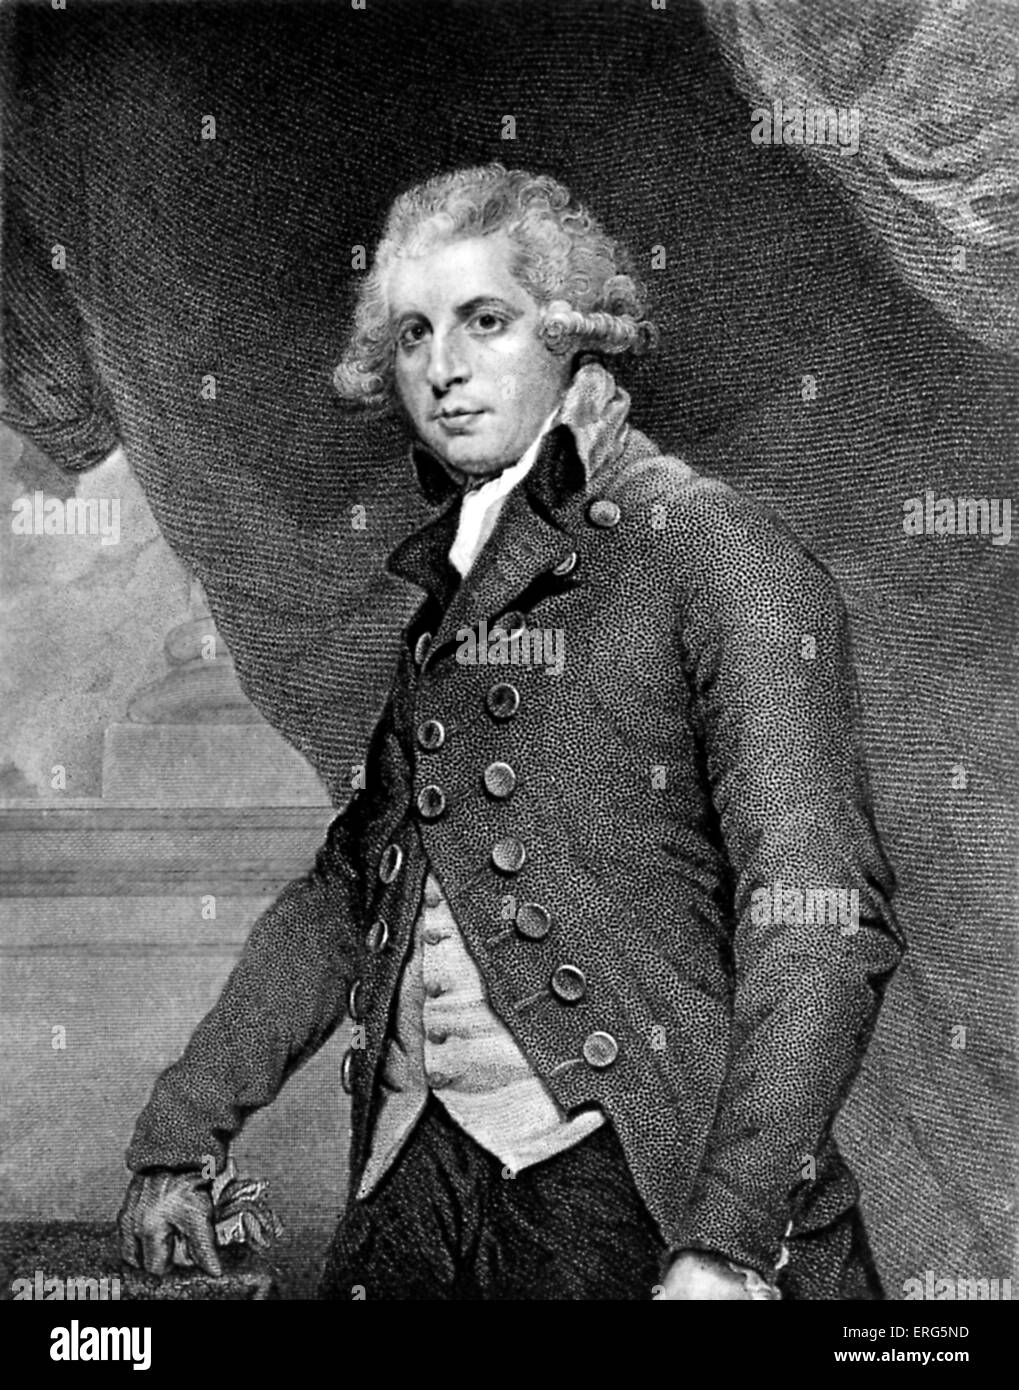 Richard Brinsley Sheridan, Irish-born playwright and poet, 30 October 1751 – 7 July 1816. From an engraving by Hicks after Stock Photo